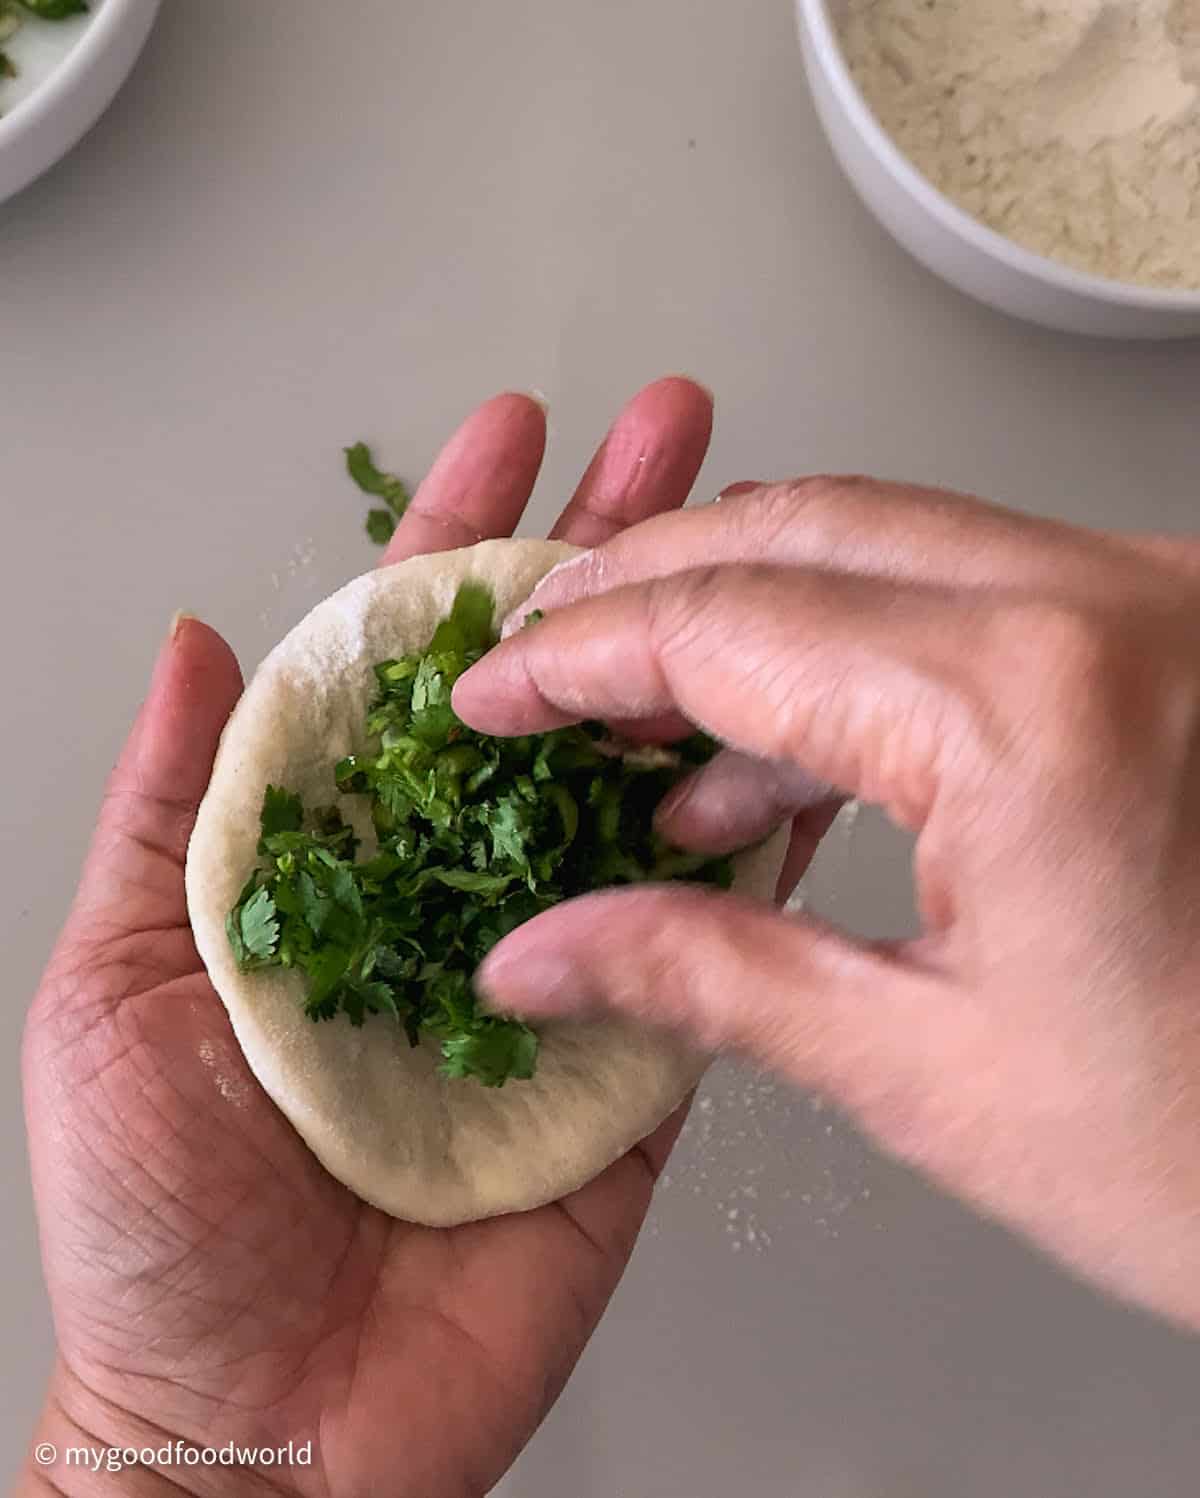 Finely chopped cilantro and green chili pepper mixture being placed in a disc of dough. The dough disc is being held in the palm of a person's hand.